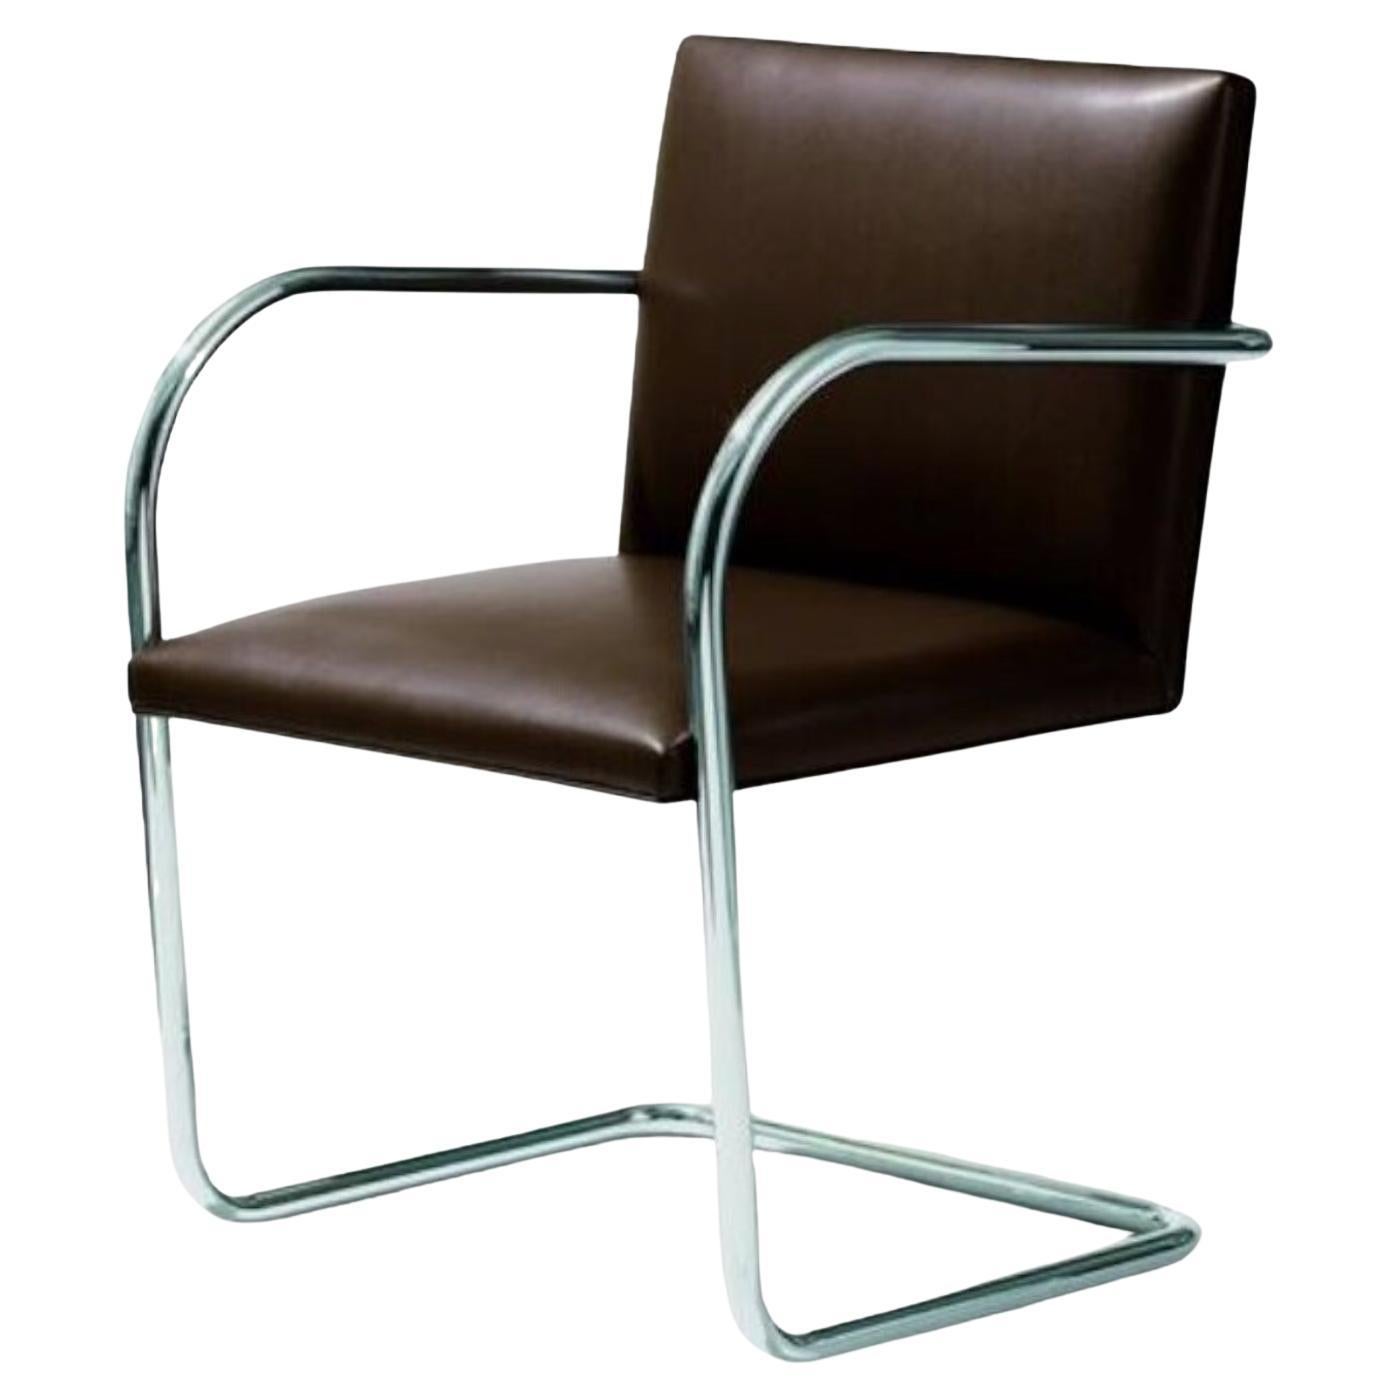 Brno Chair, Tubular, Ludwig Mies van der Rohe  1930
Designed by Mies van der Rohe for his renowned Tugendhat House in Brno, Czech Republic, the Brno Chair reflects the groundbreaking simplicity of its original environment. The design is celebrated